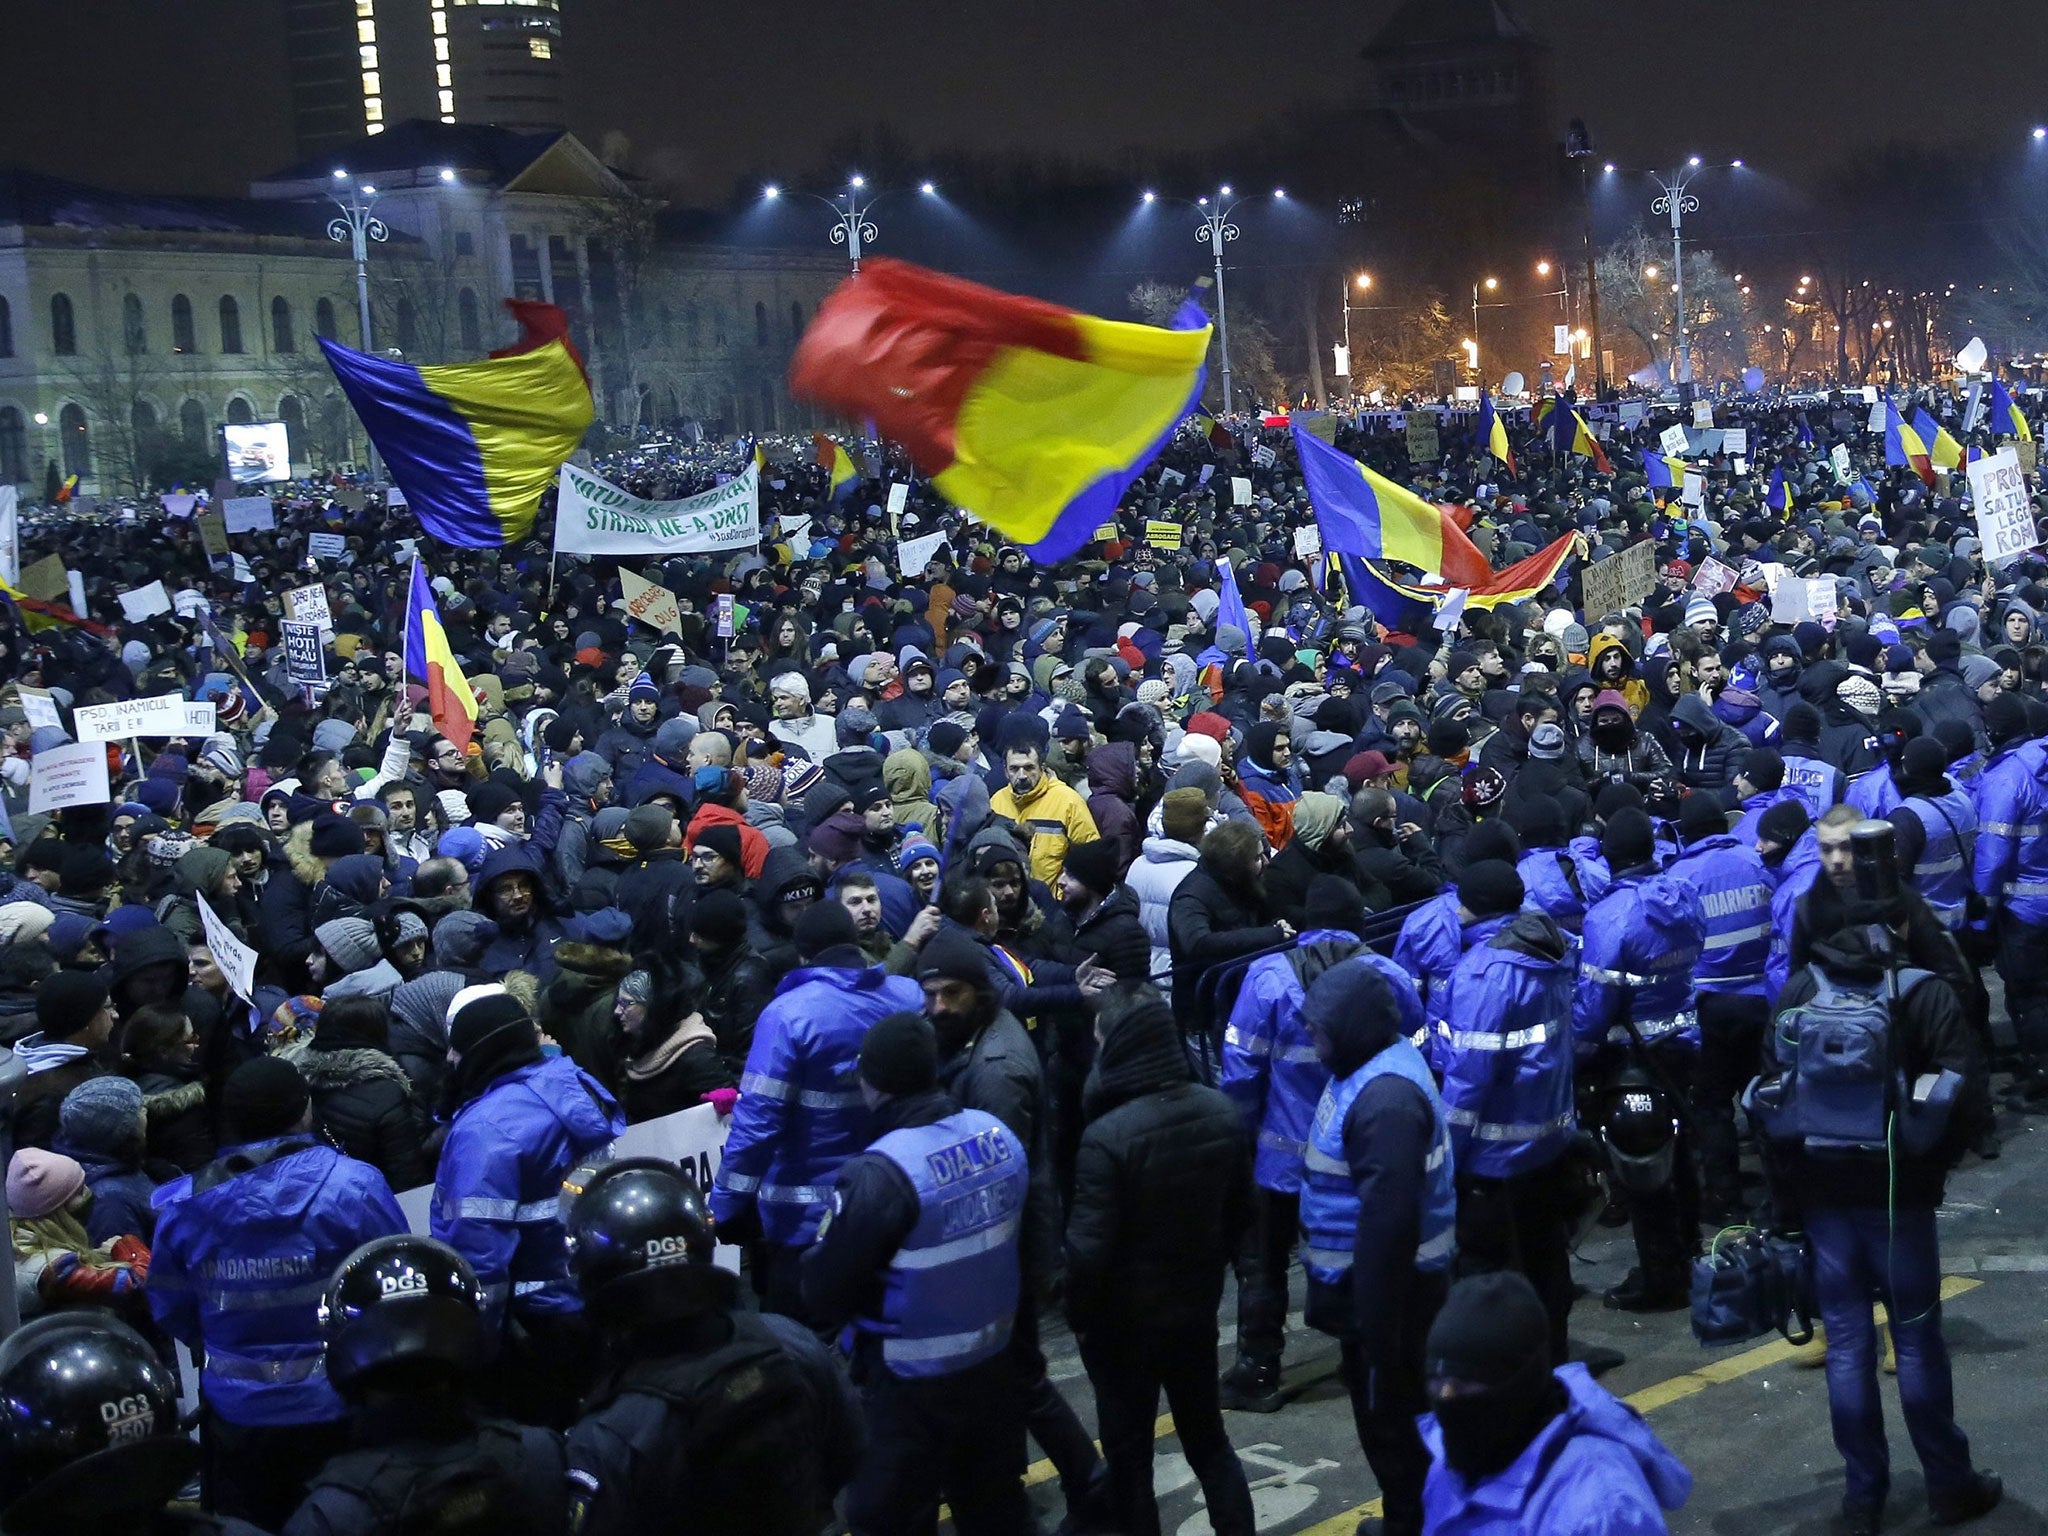 &#13;
People wave flags and shout anti-government slogans during a protest rally in front of government headquarters in Bucharest last week &#13;